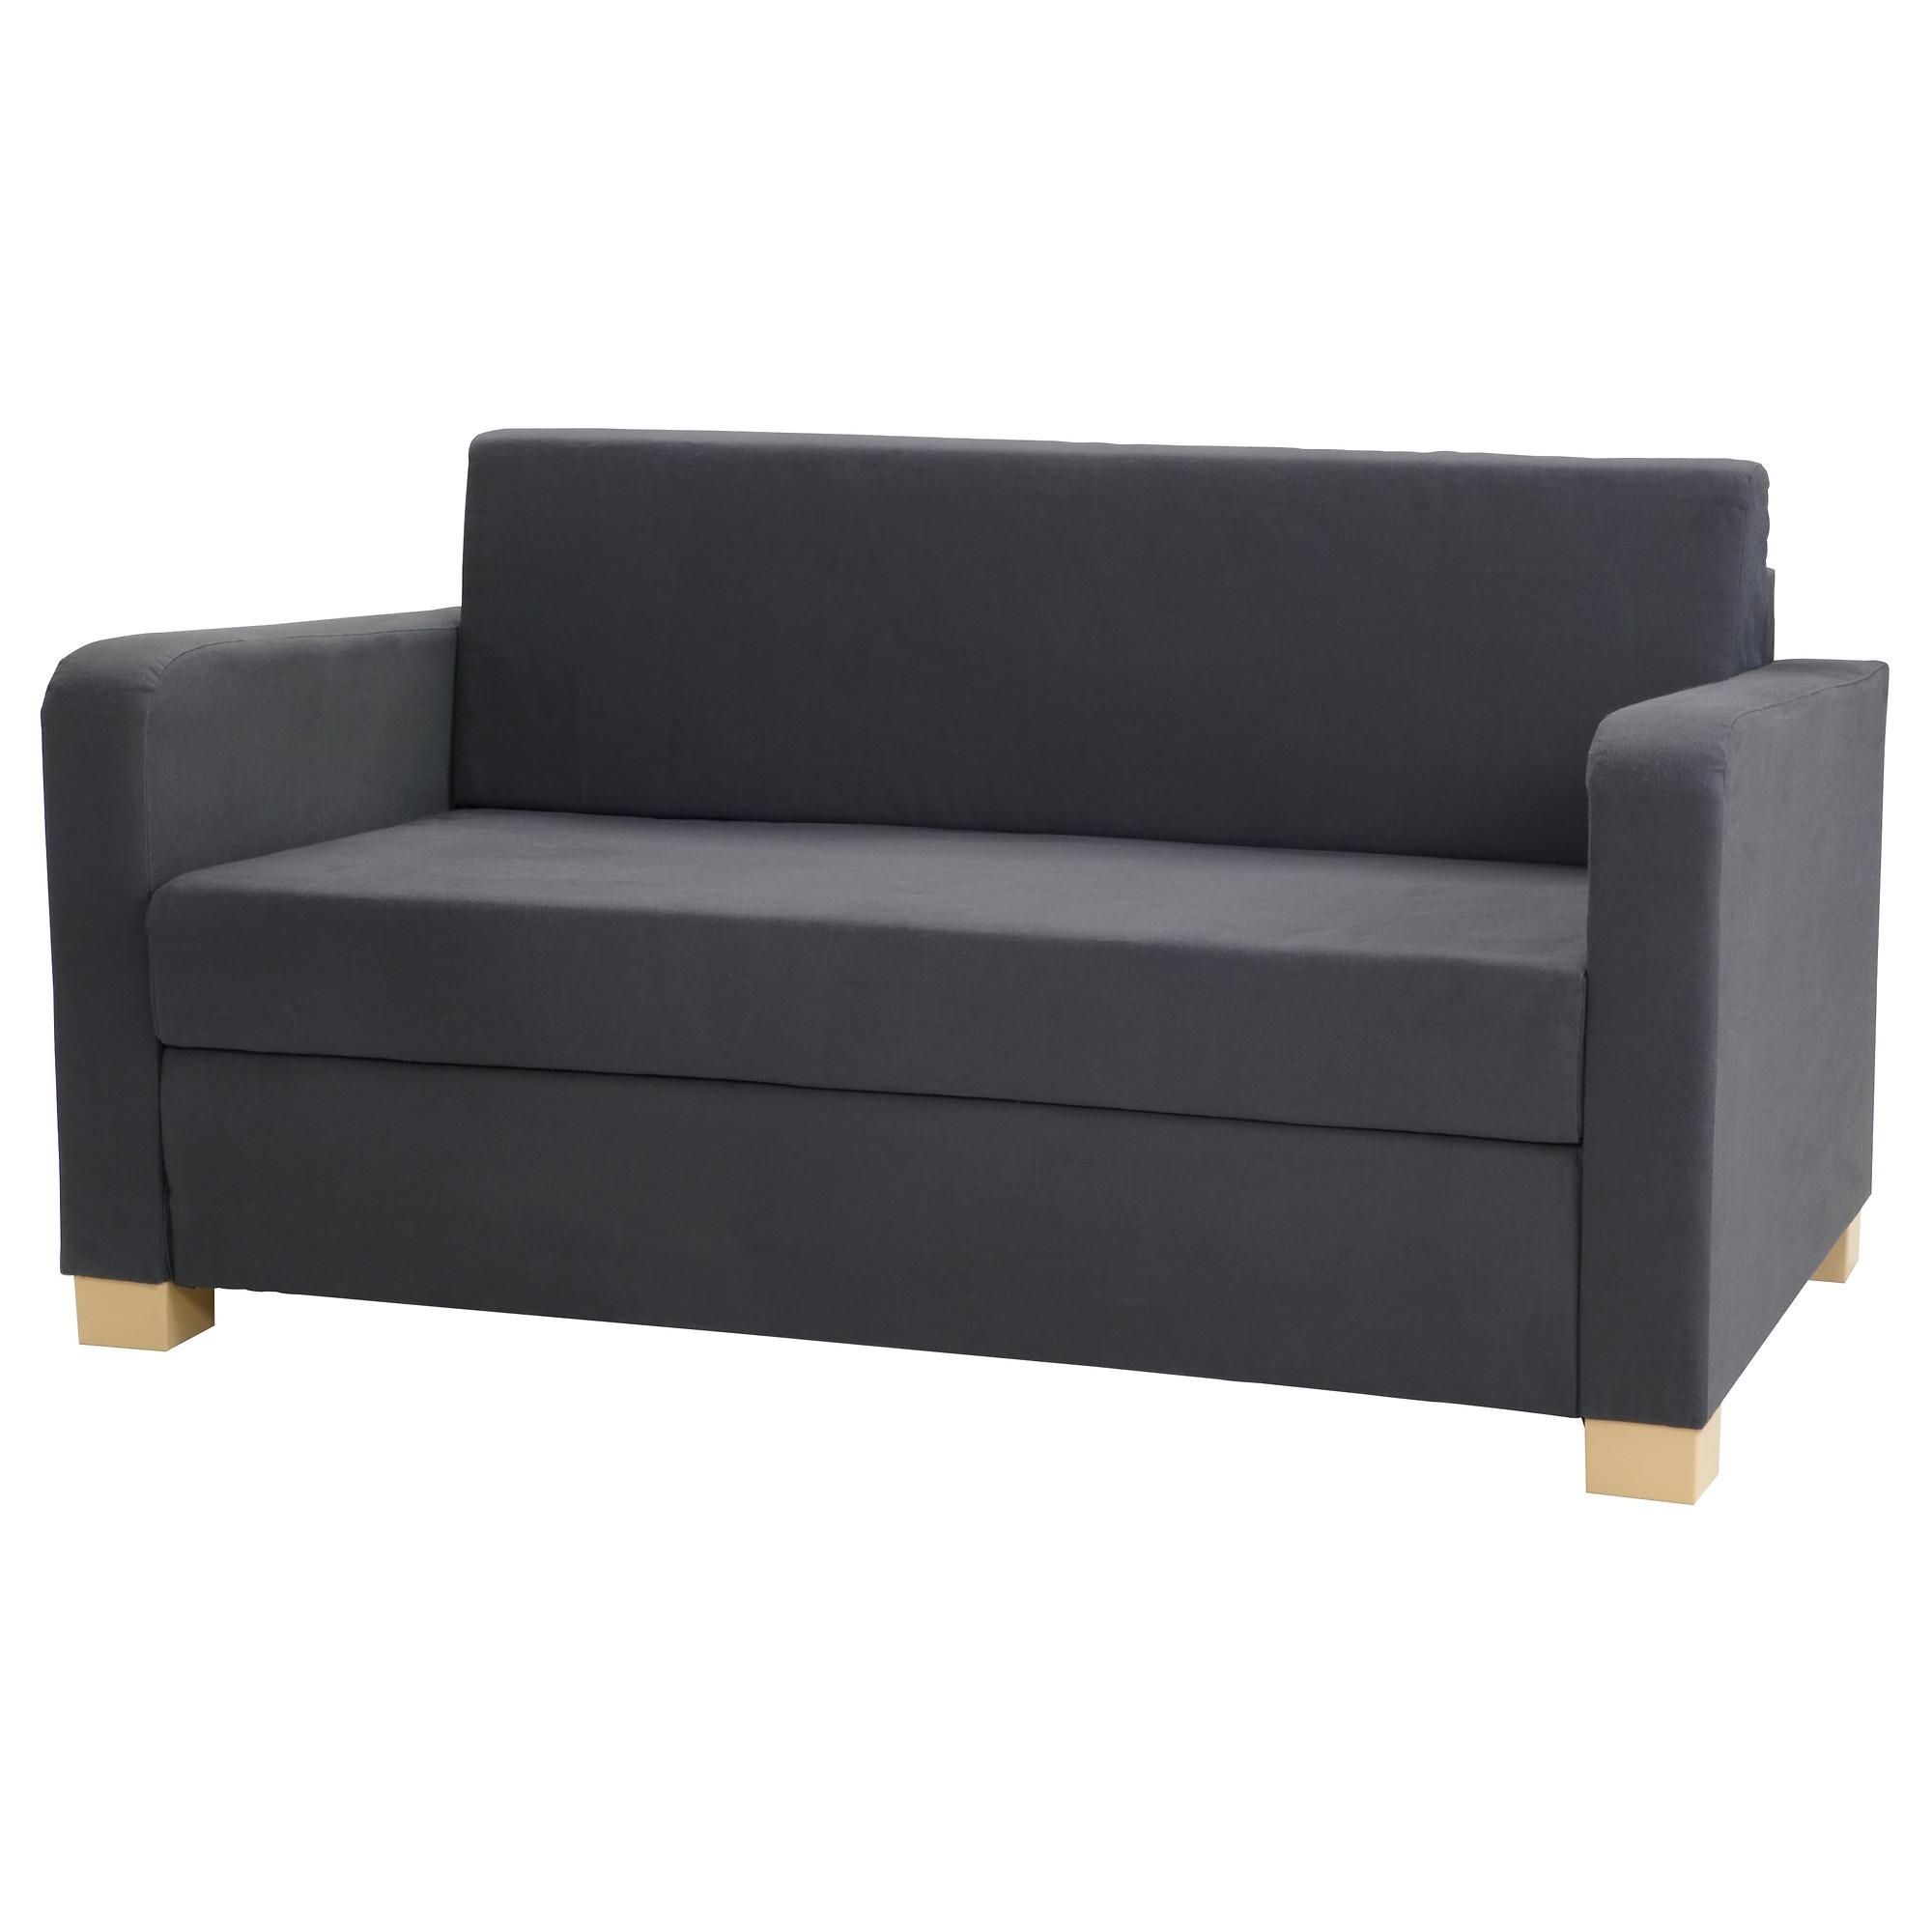 Sofa Beds & Futons – Ikea Within Sofa Bed Sleepers (View 8 of 20)